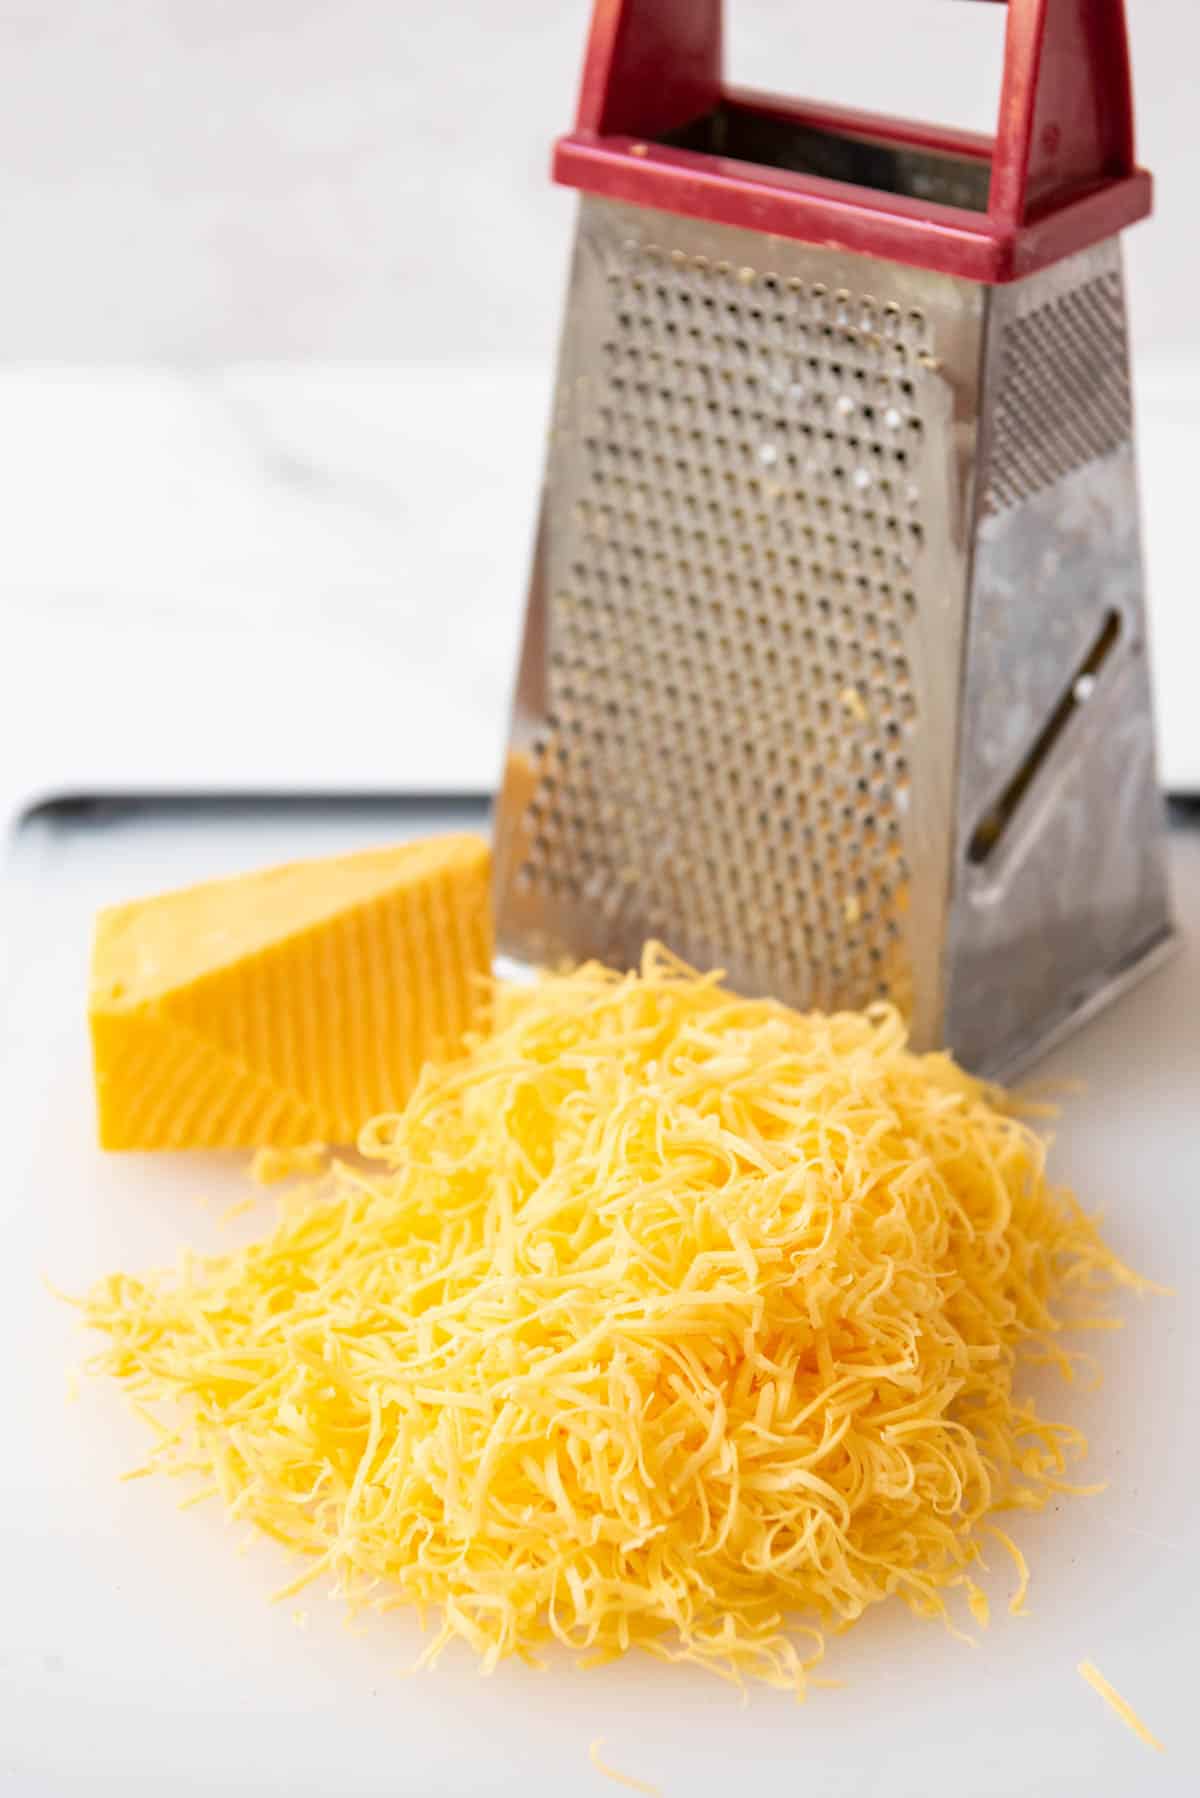 Freshly grated cheddar cheese on a cutting board next to a box grater.